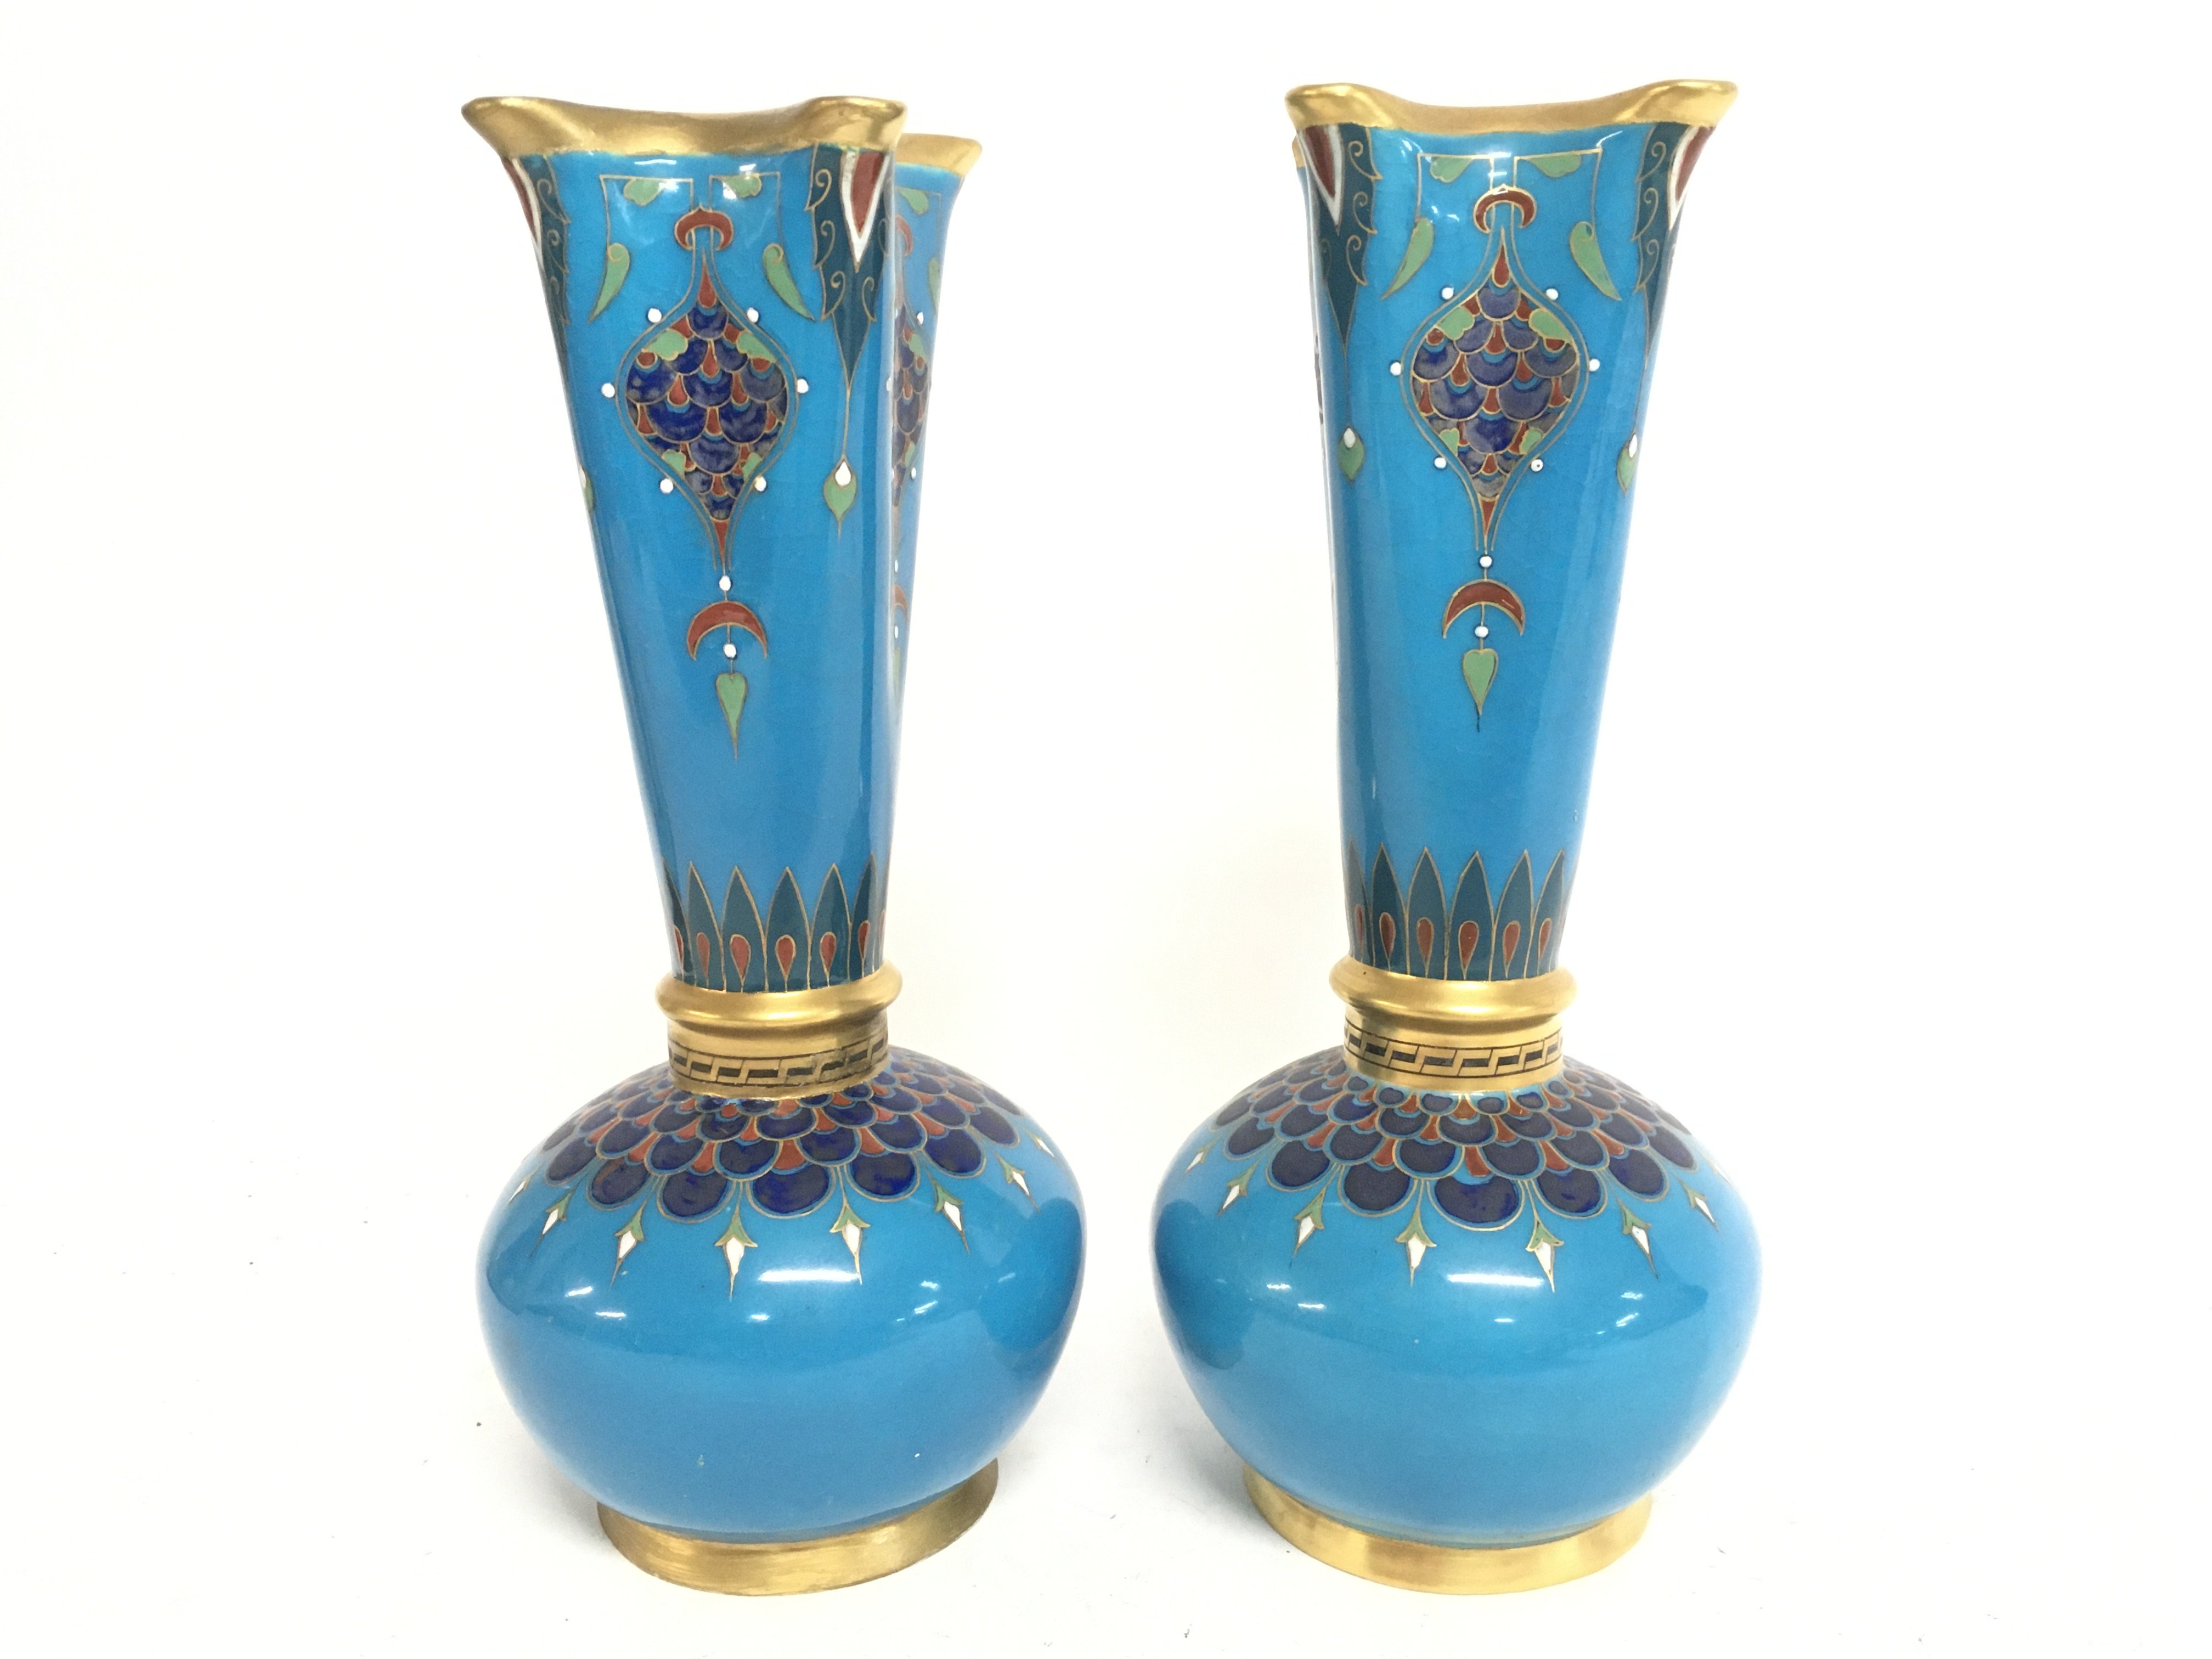 A pair of ornate blue and gilt Minton vases (damag - Image 2 of 4